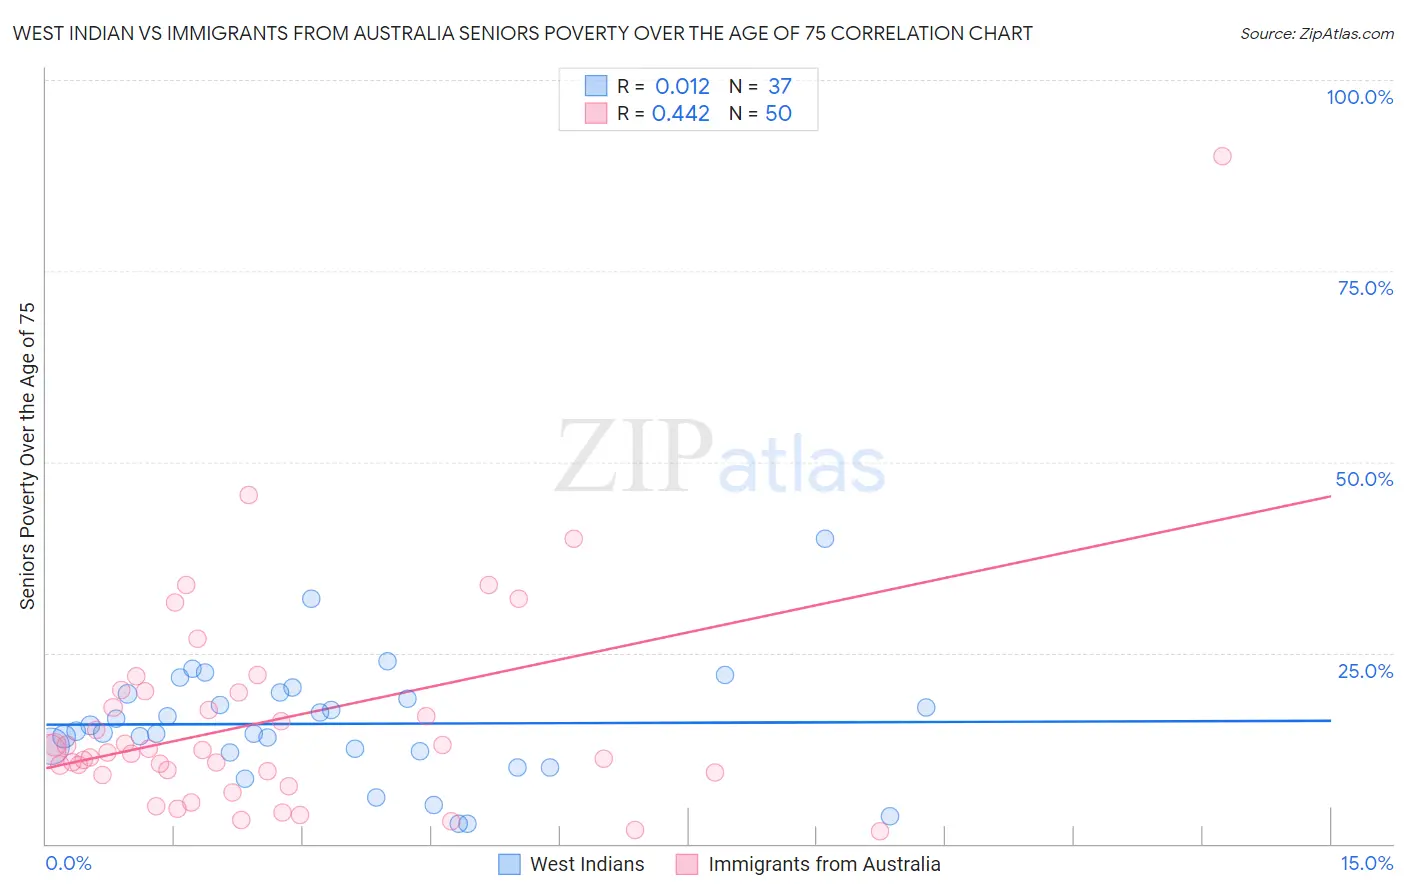 West Indian vs Immigrants from Australia Seniors Poverty Over the Age of 75